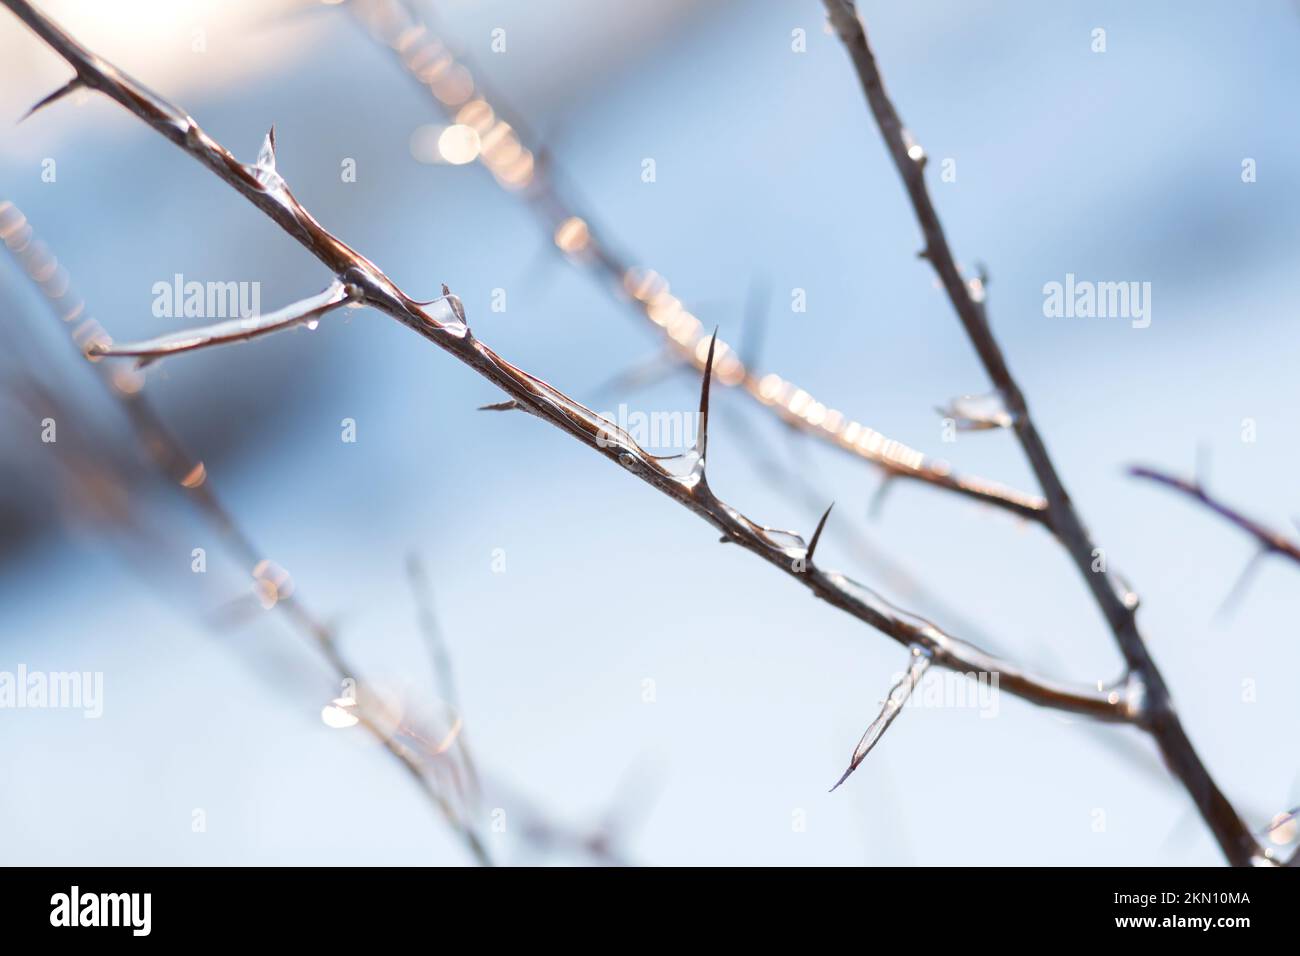 Winter season in the field. Close up details of field grass in the winter. A branch of reeds covered with ice. Stock Photo